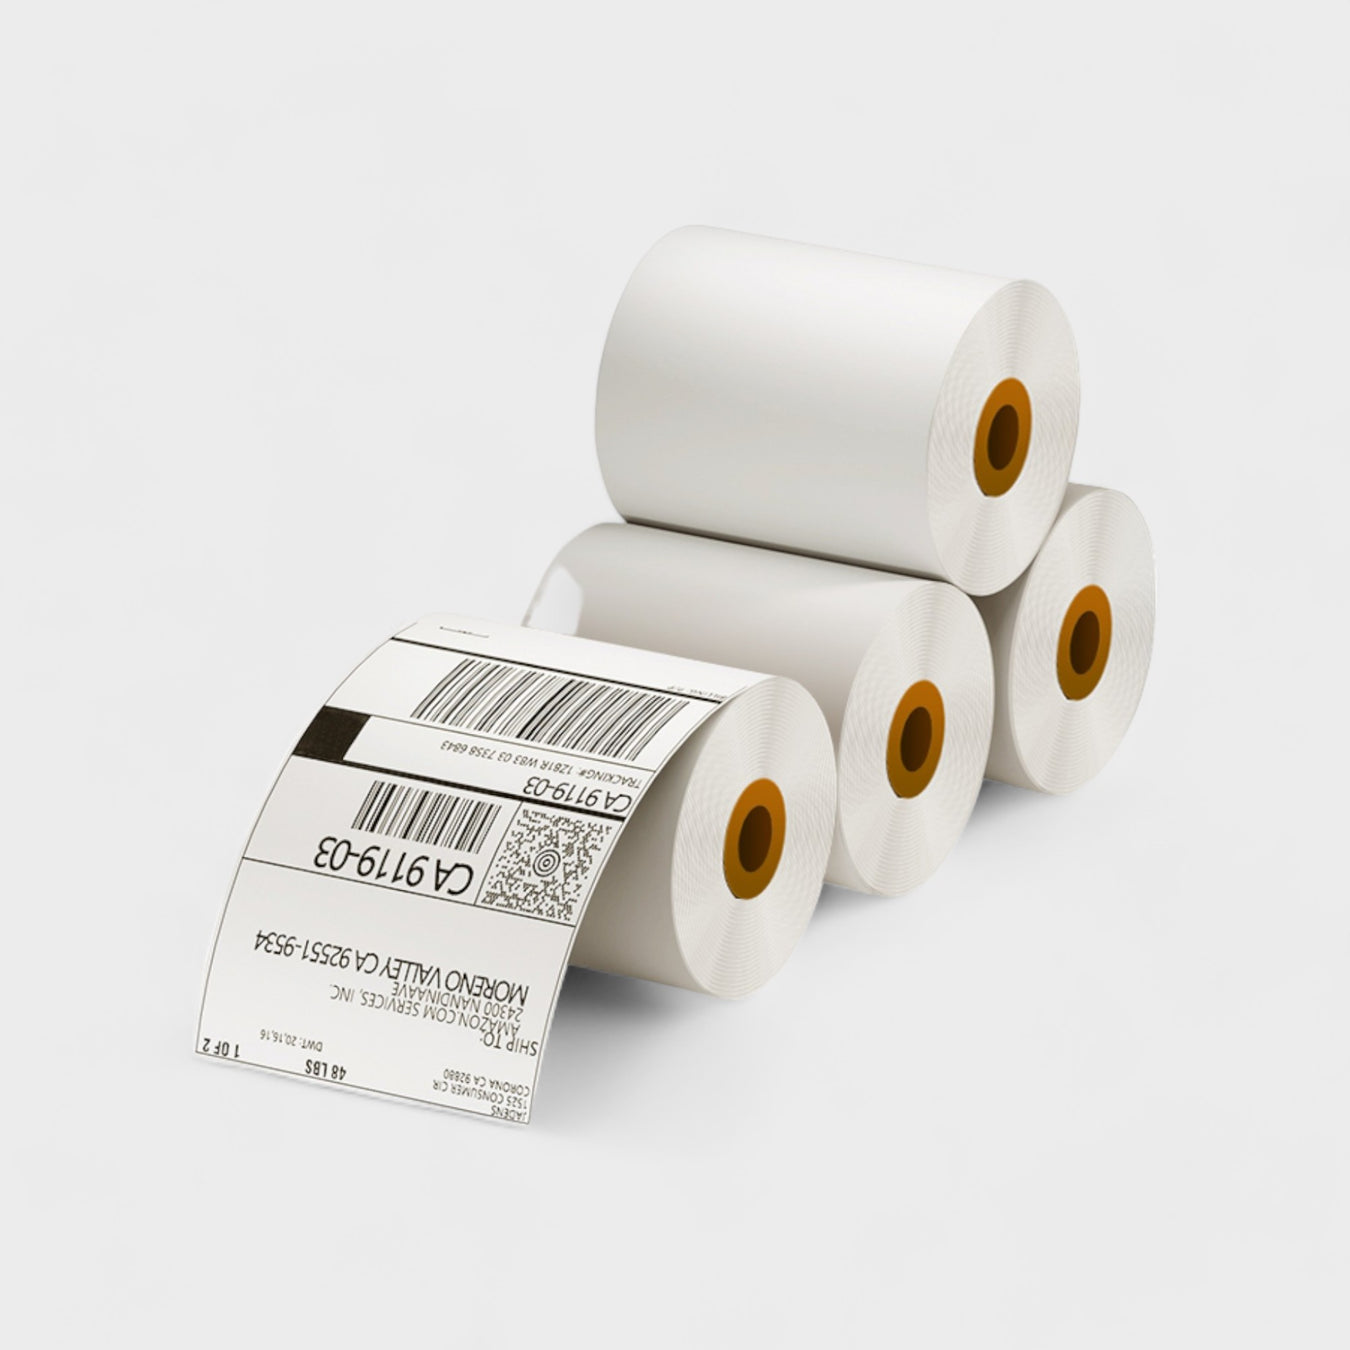 Thermal Shipping Labels Series 3x5 4x6 inch and more size labels